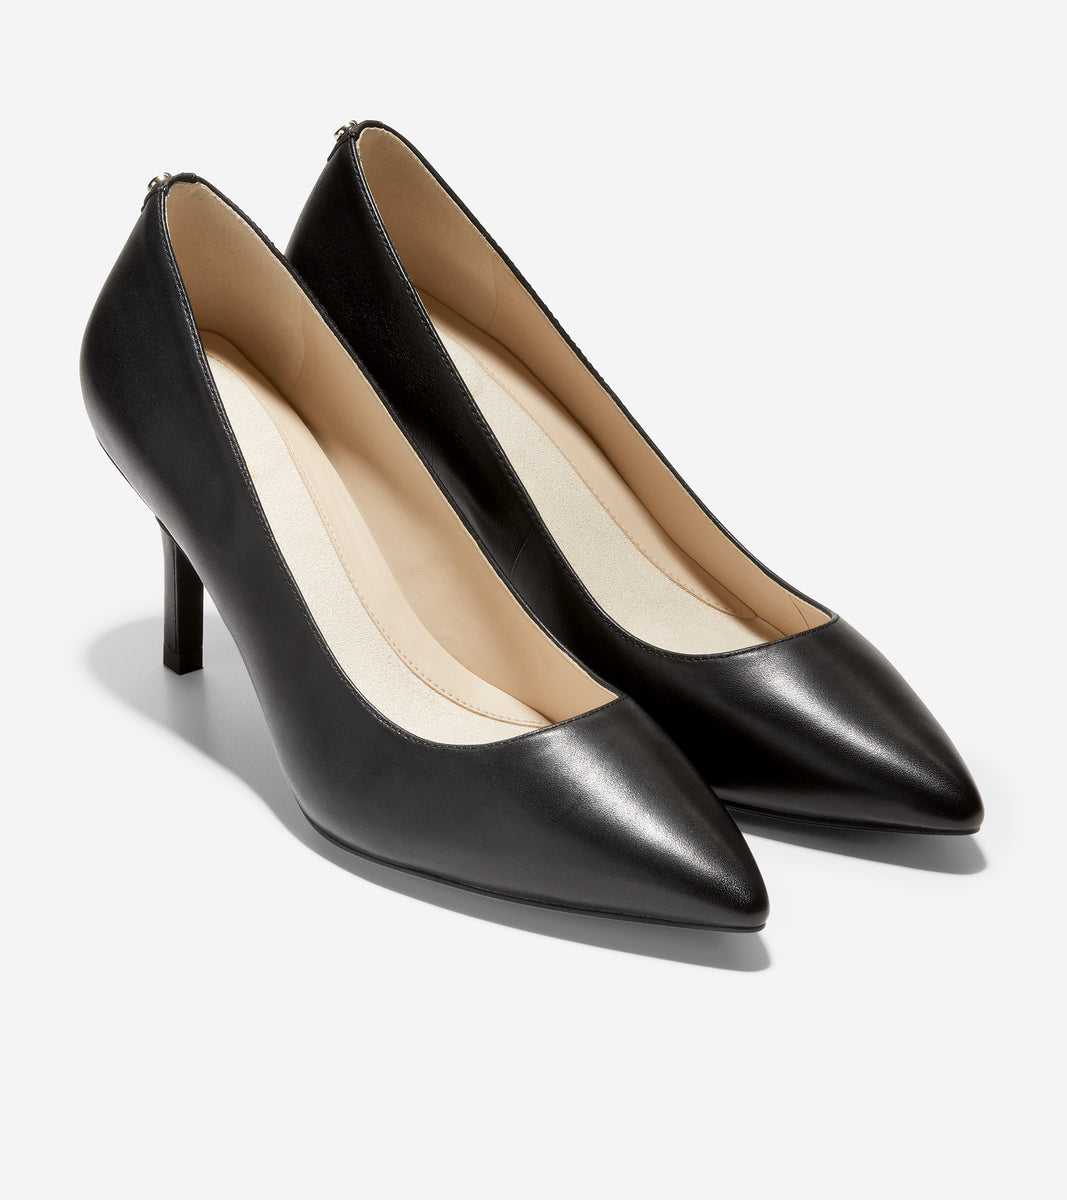 ColeHaan-The Go-To Stiletto Pump-w18173-Black Leather